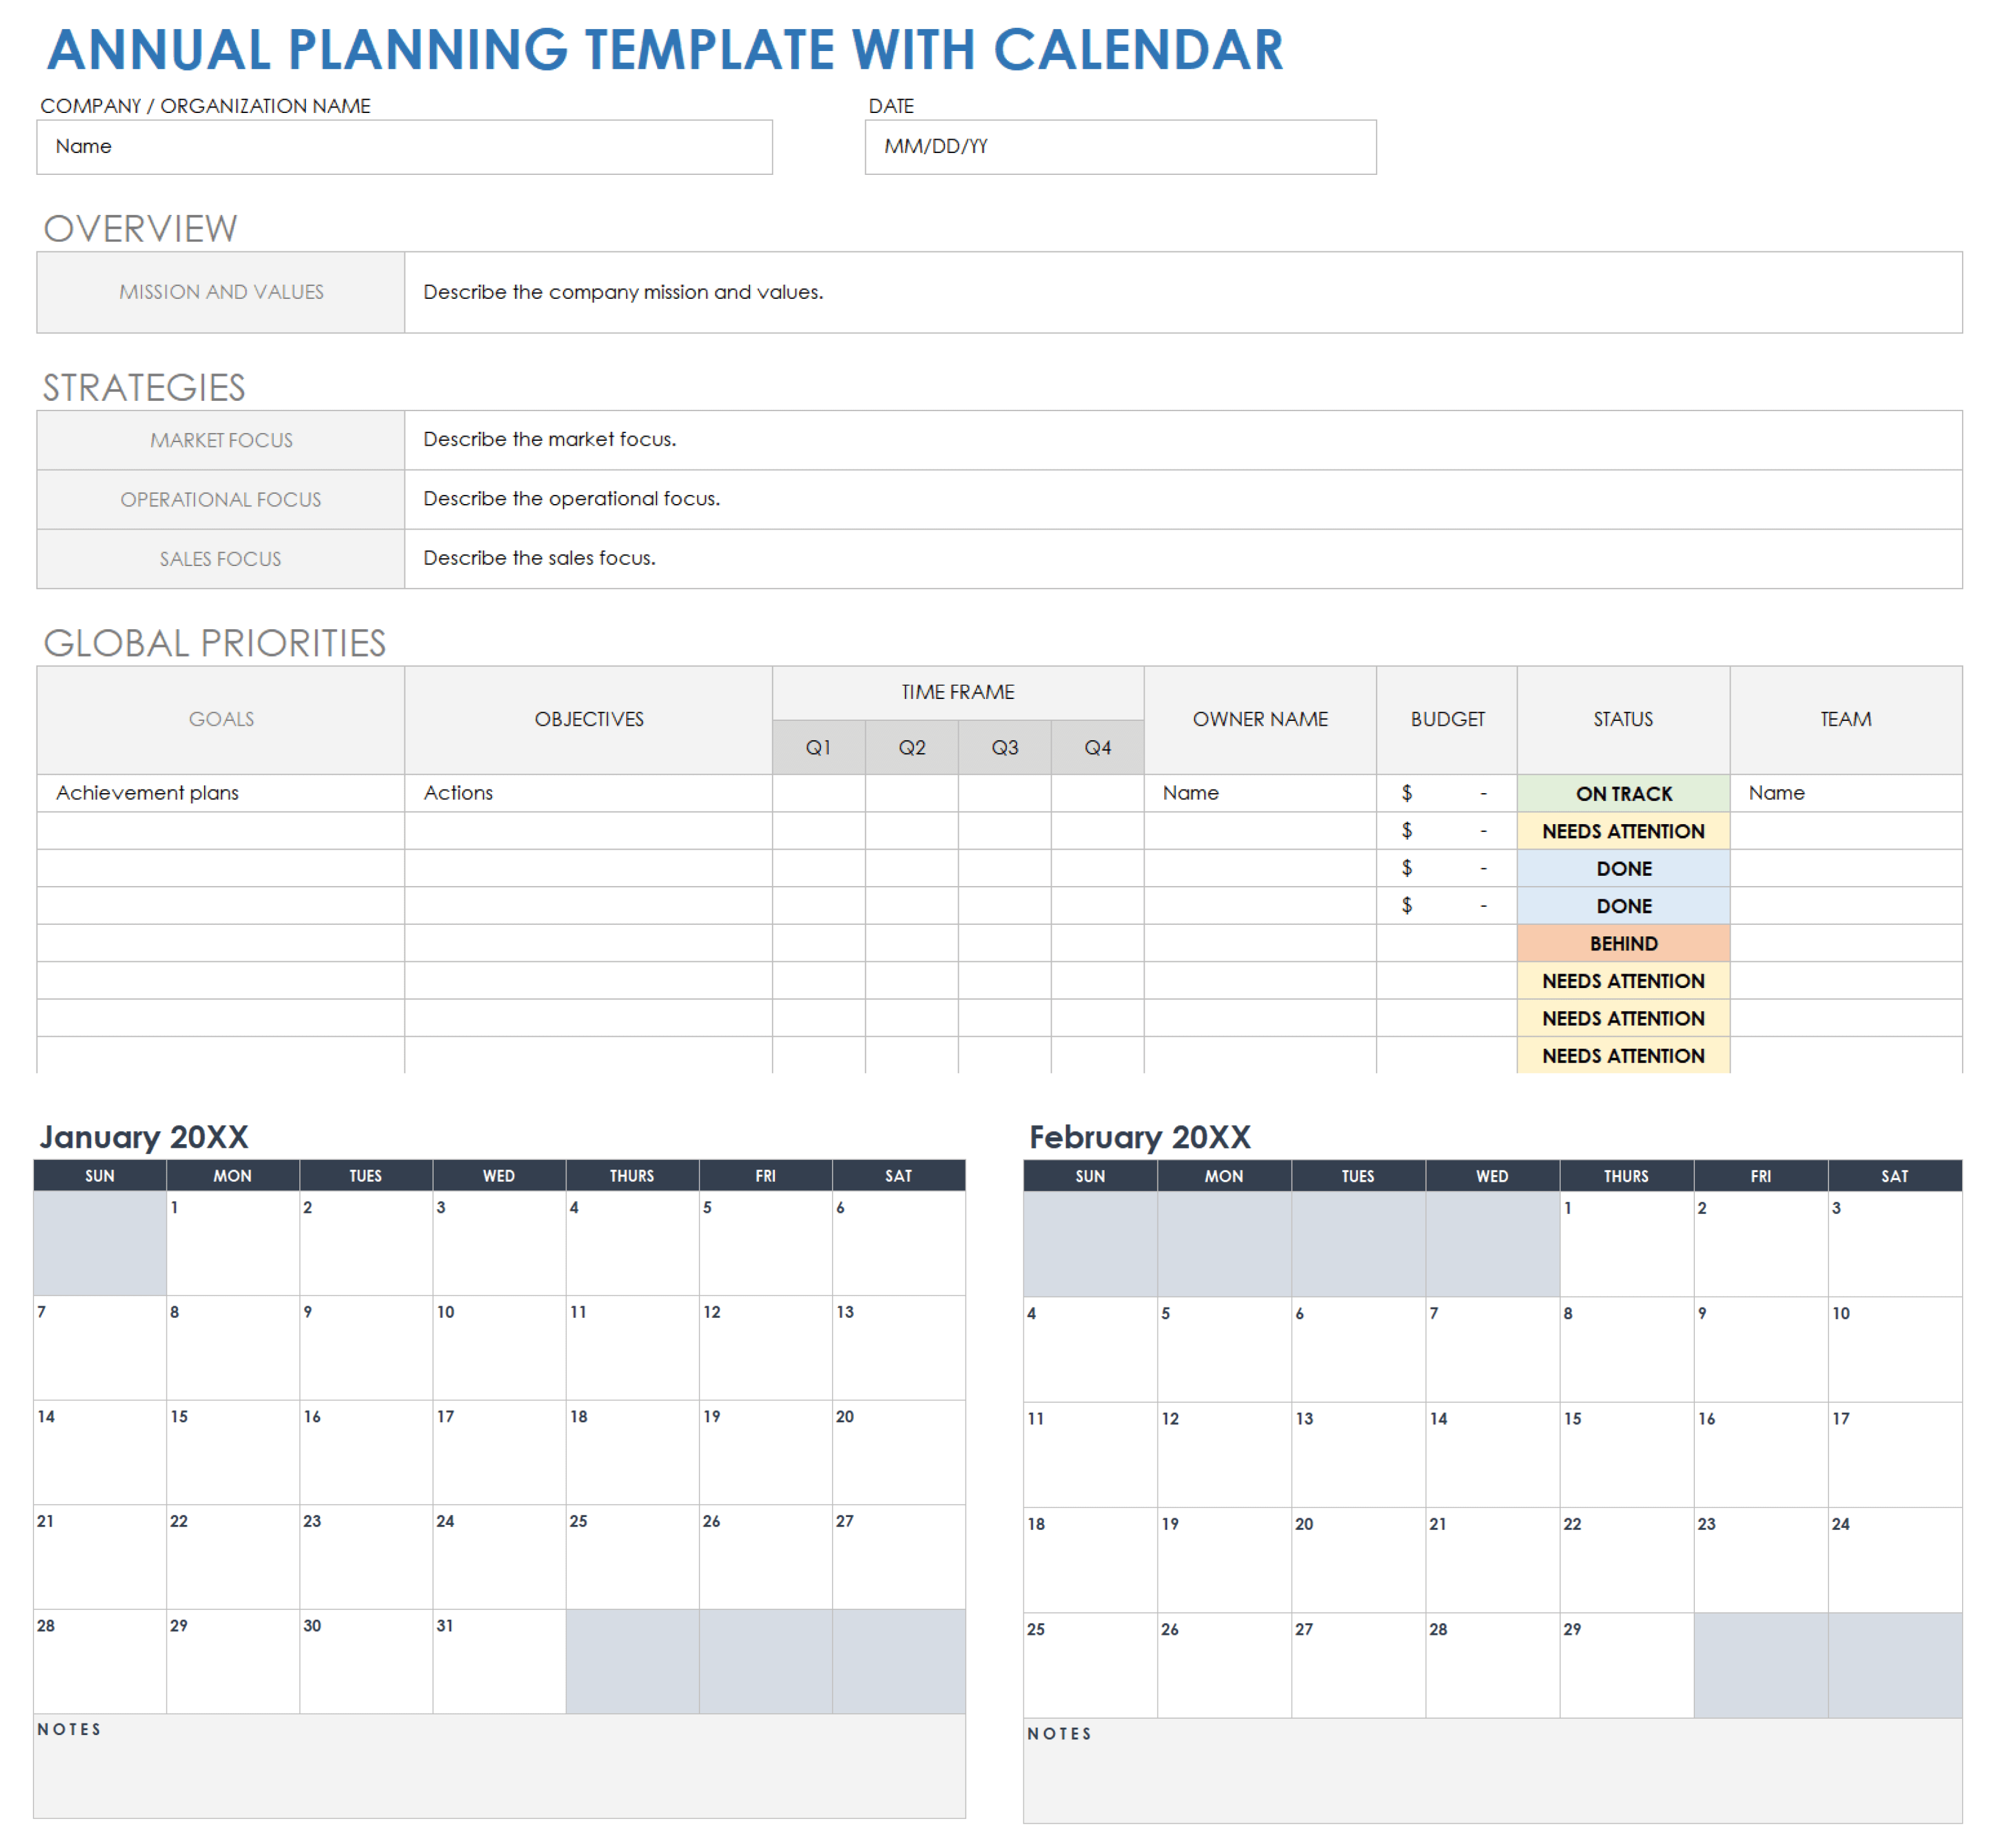 Annual Planning Template with Calendar